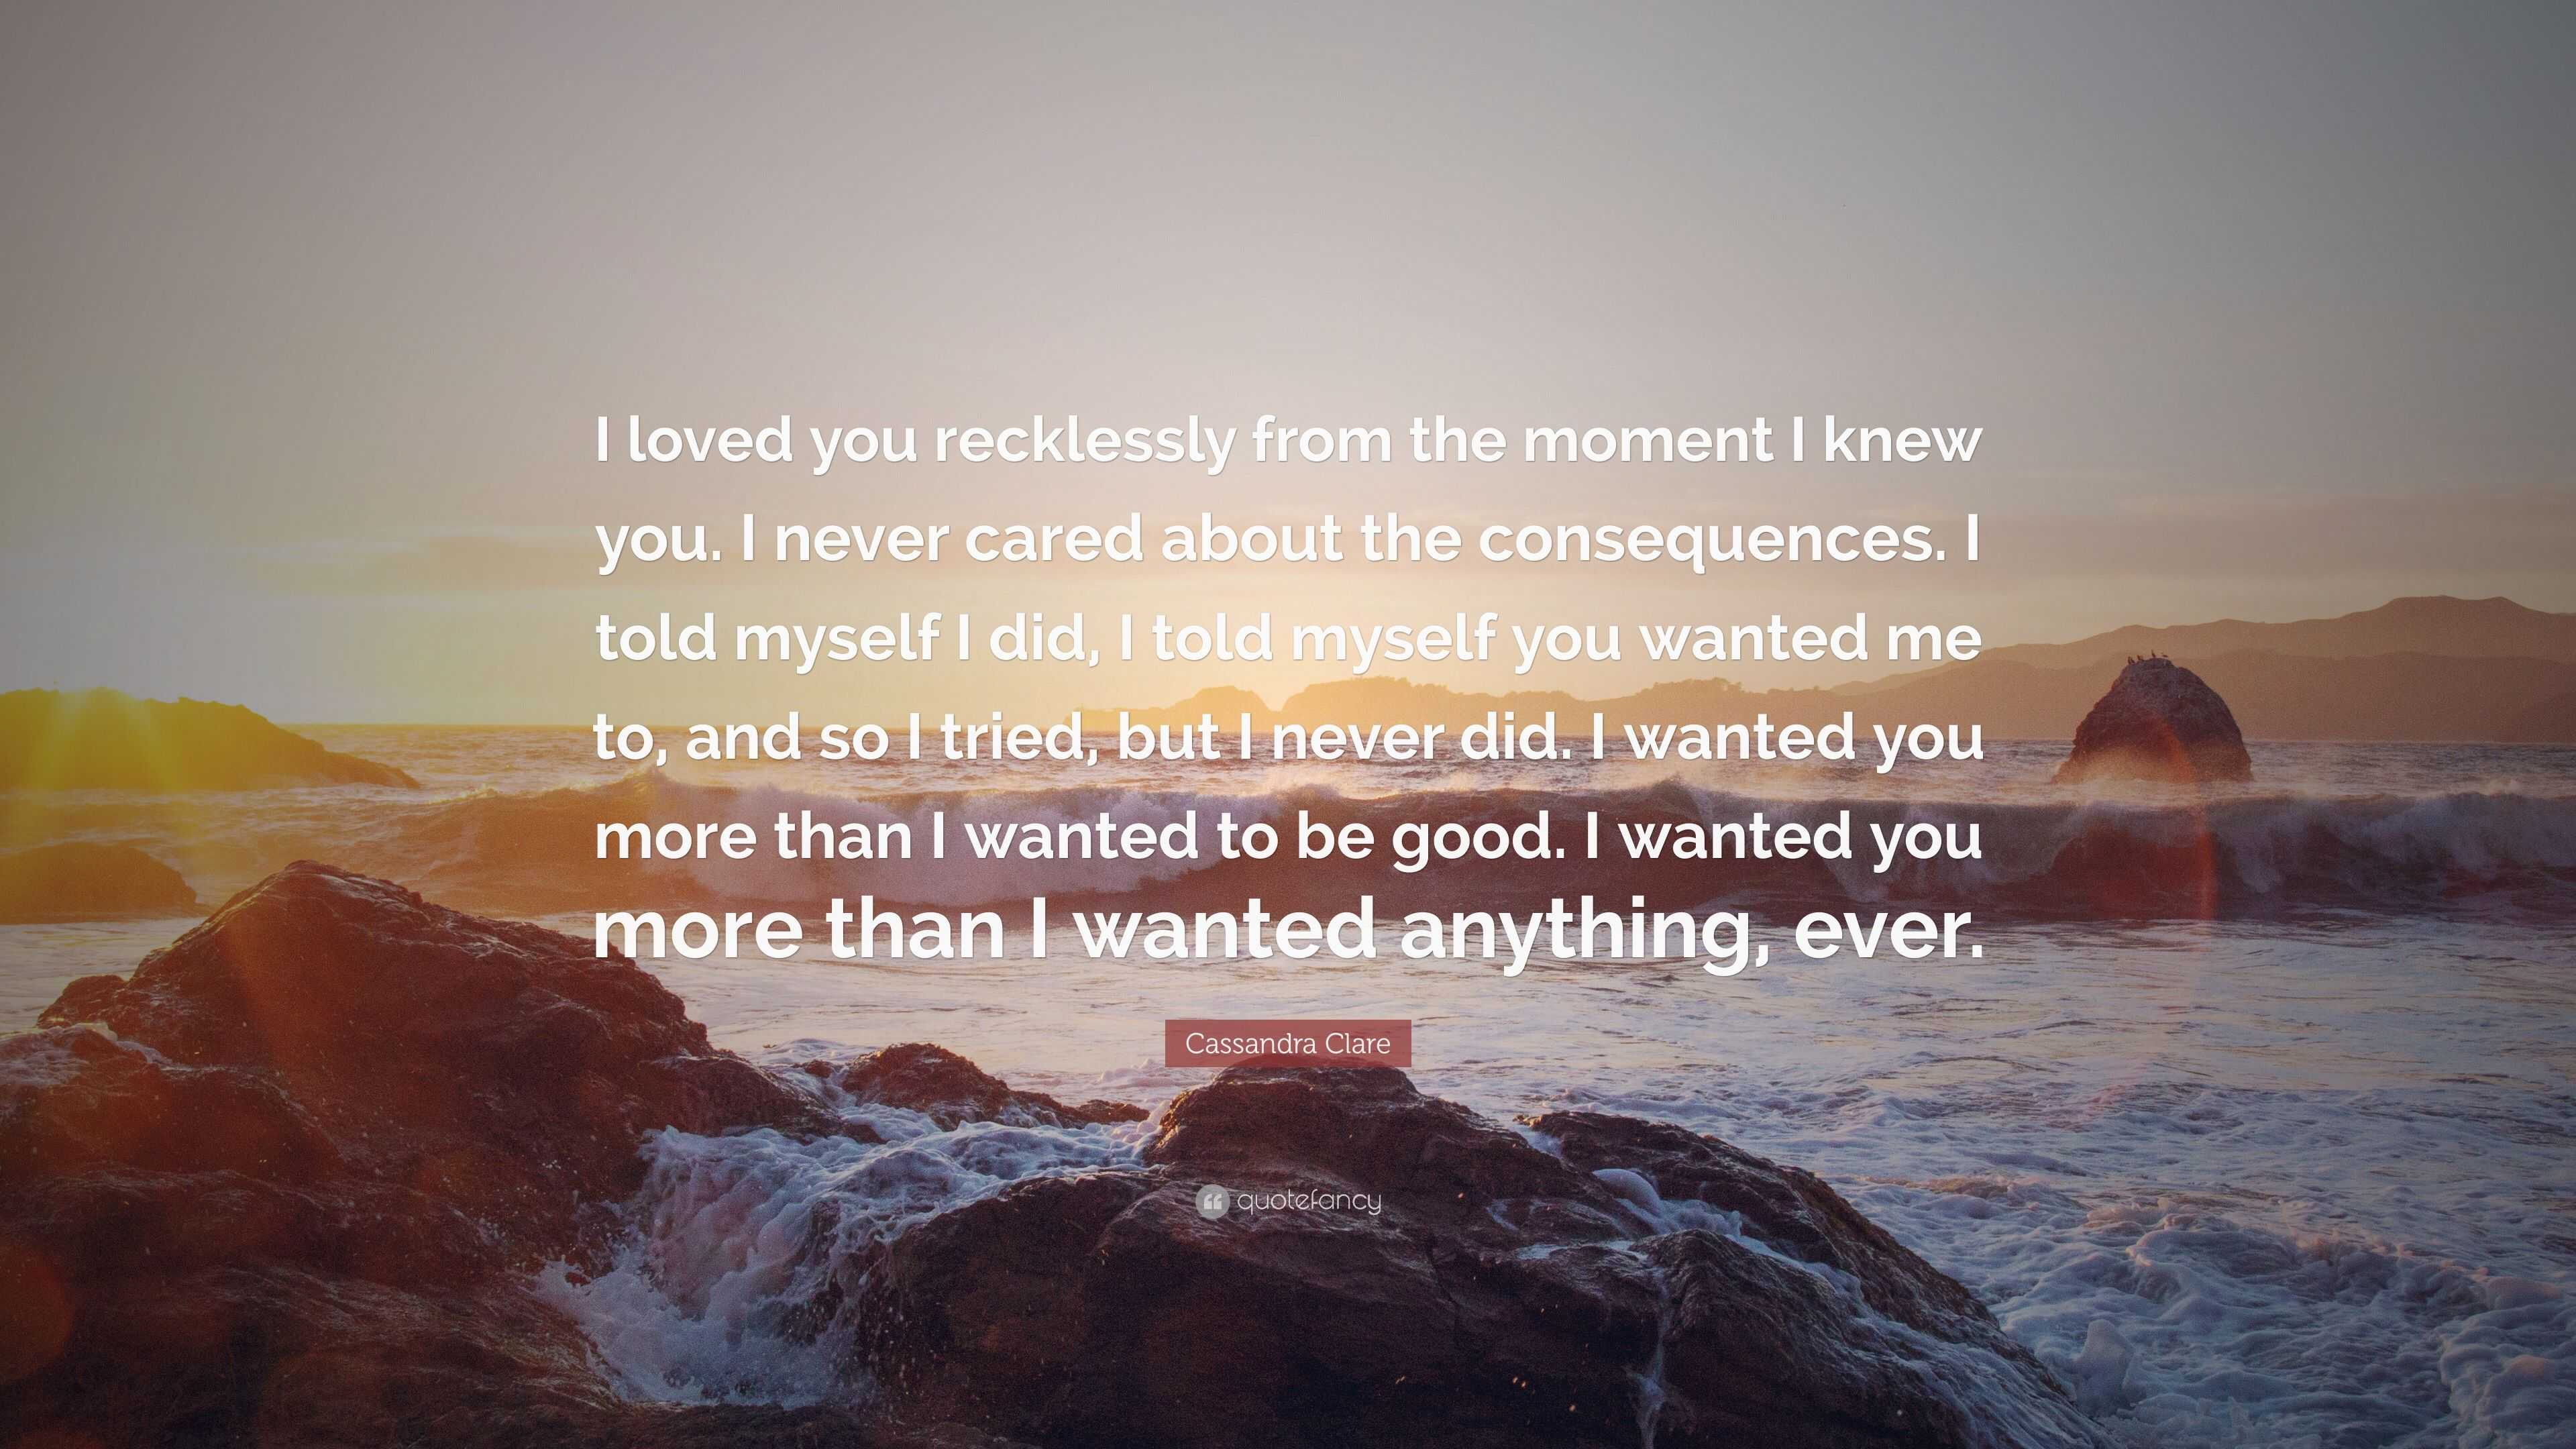 Cassandra Clare Quote: “I loved you recklessly from the moment I knew ...